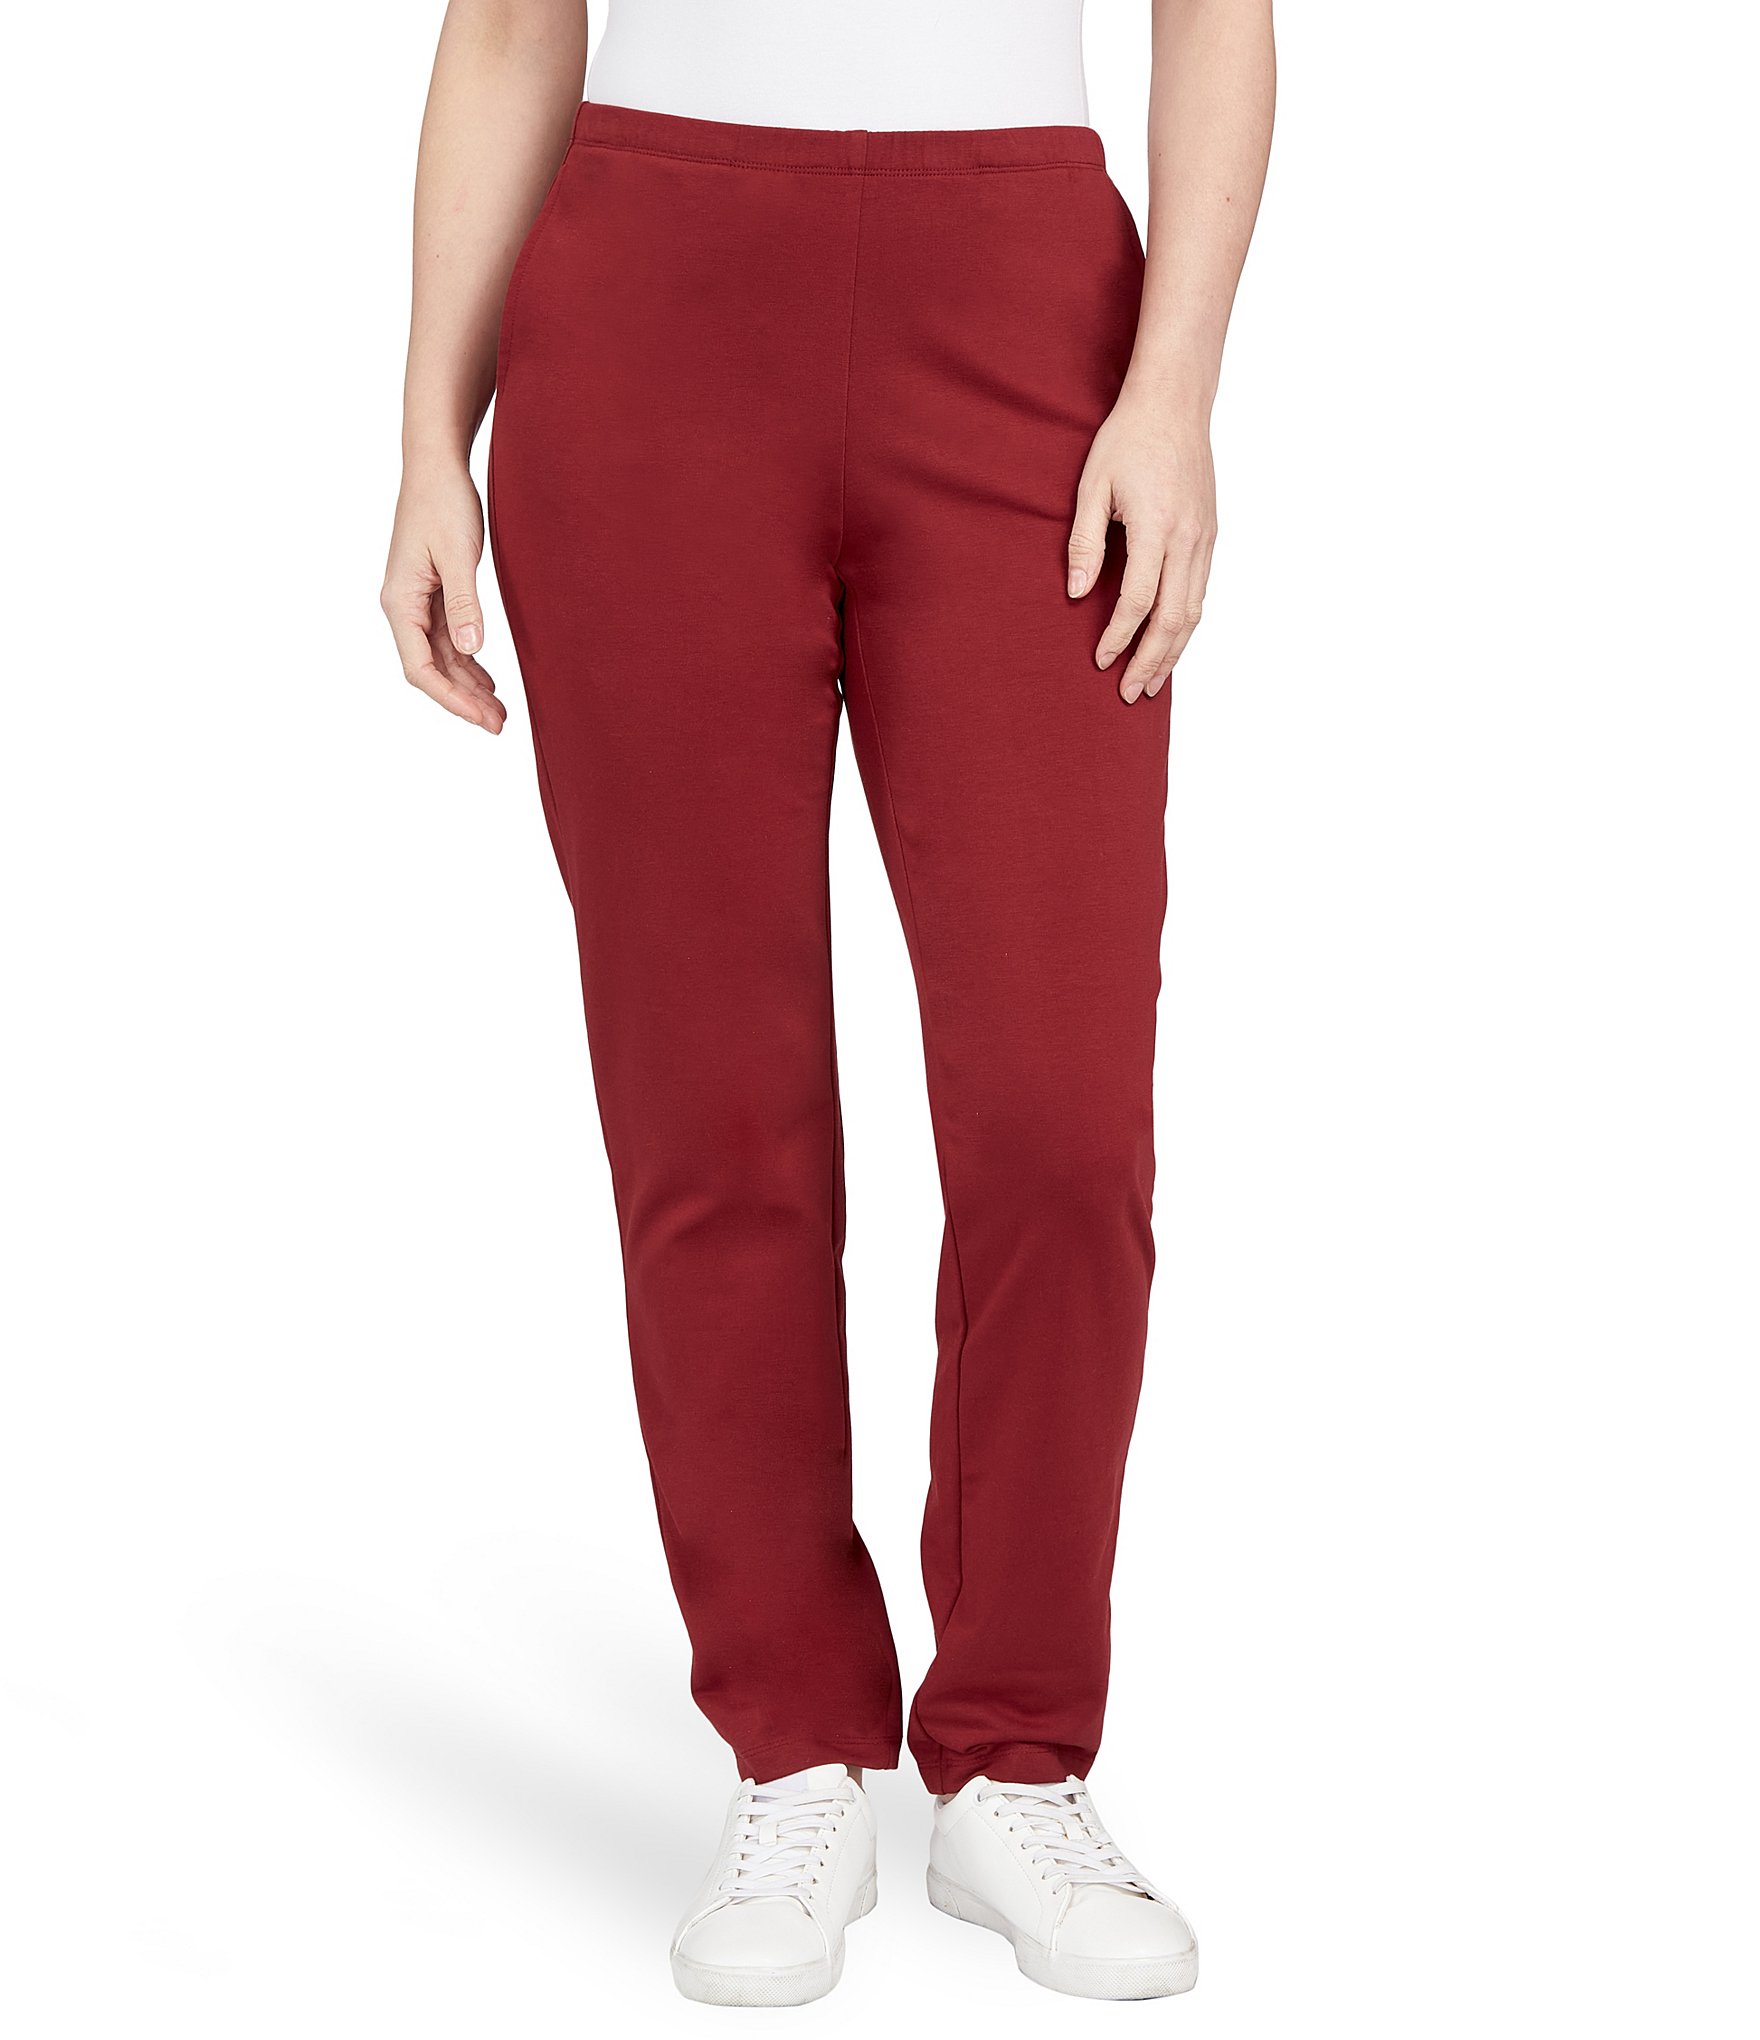 Ruby Rd. Petite Size French Knit Terry Pull-On Pants | Dillard's